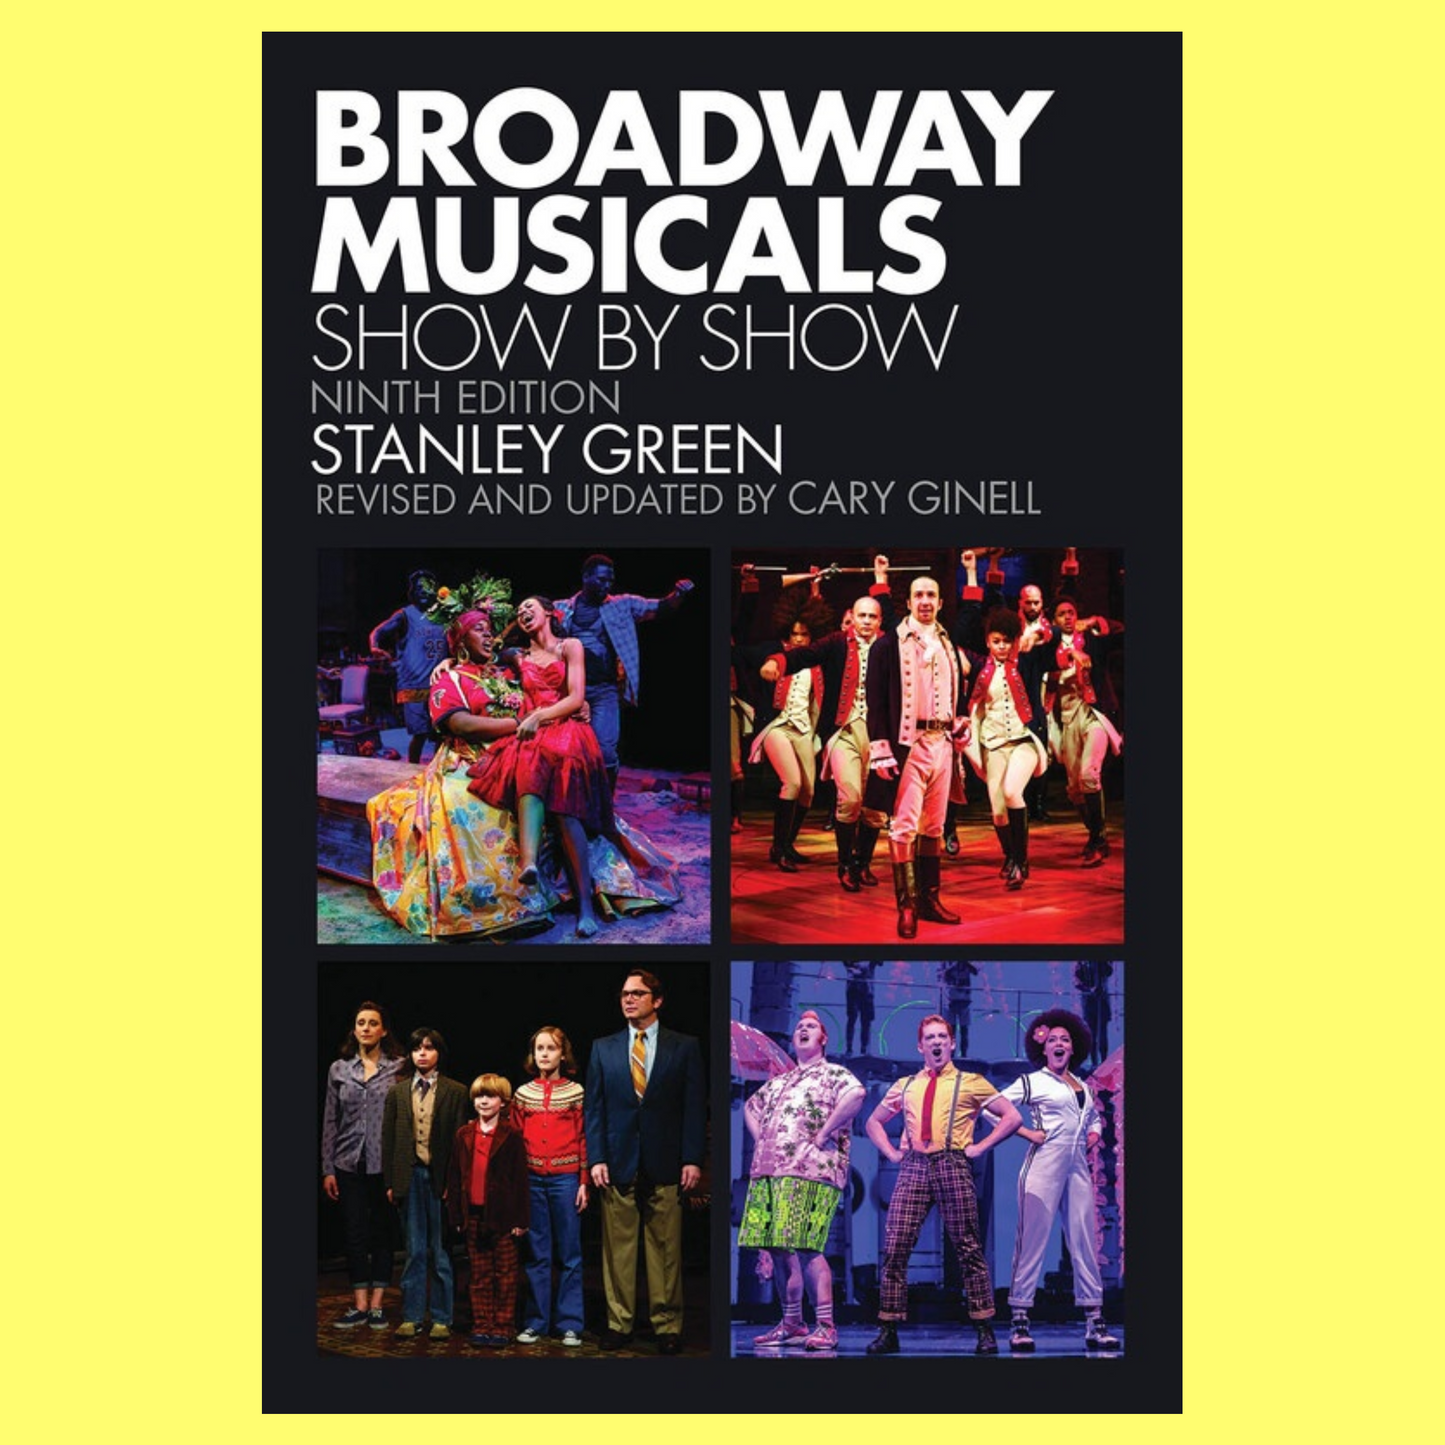 Broadway Musicals - Show By Show Book (Ninth Edition)